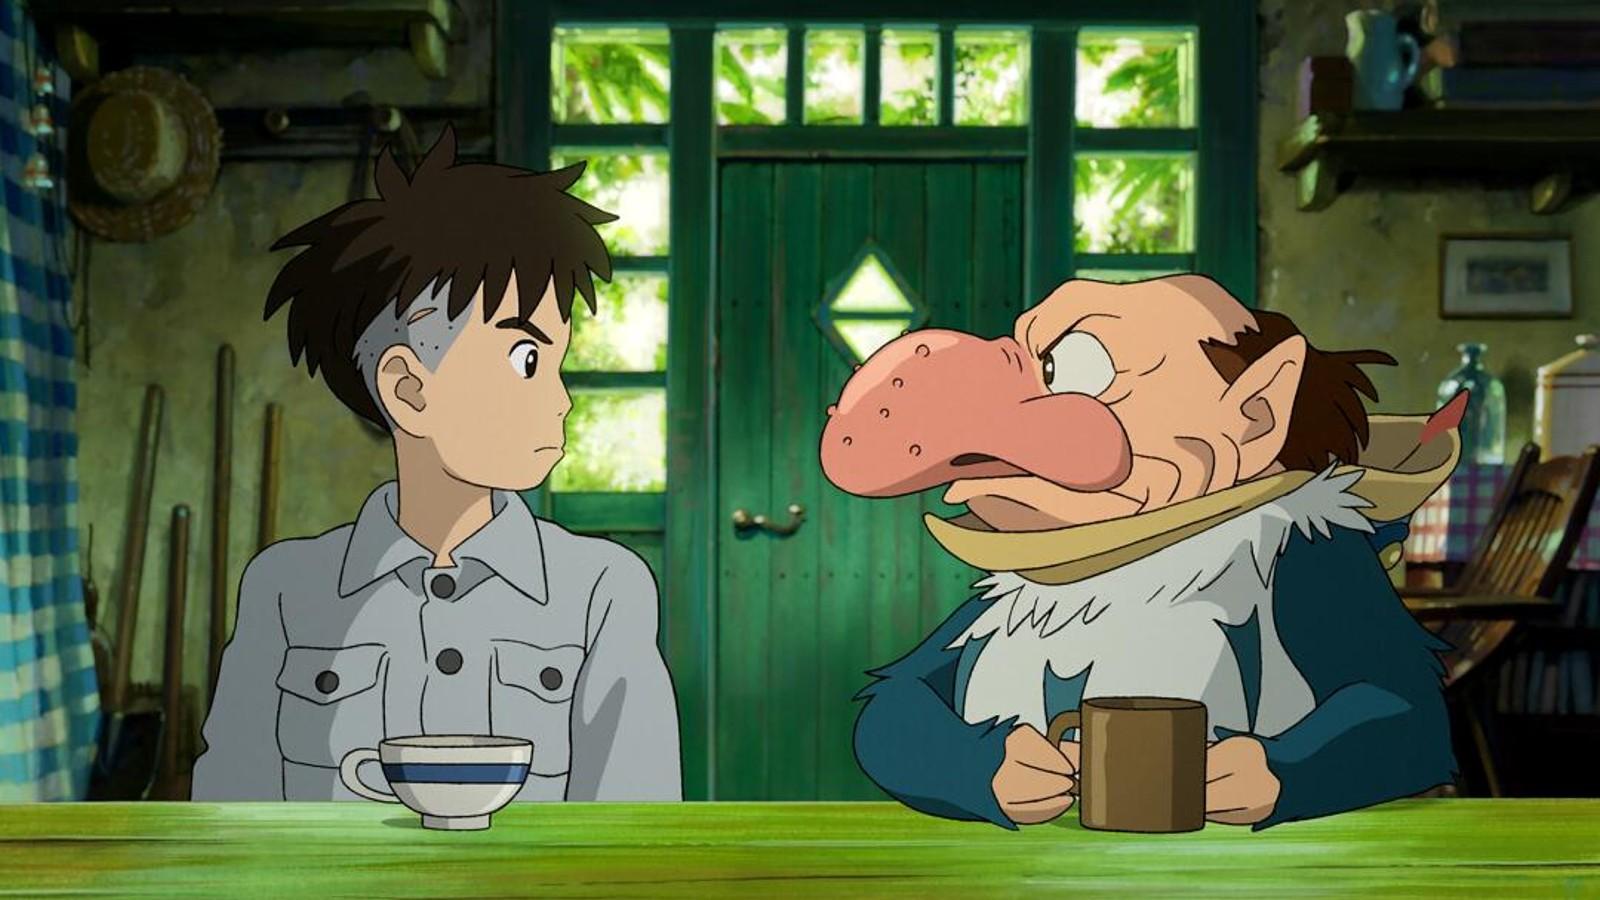 The Boy having dinner with a scary man in The Boy and the Heron.